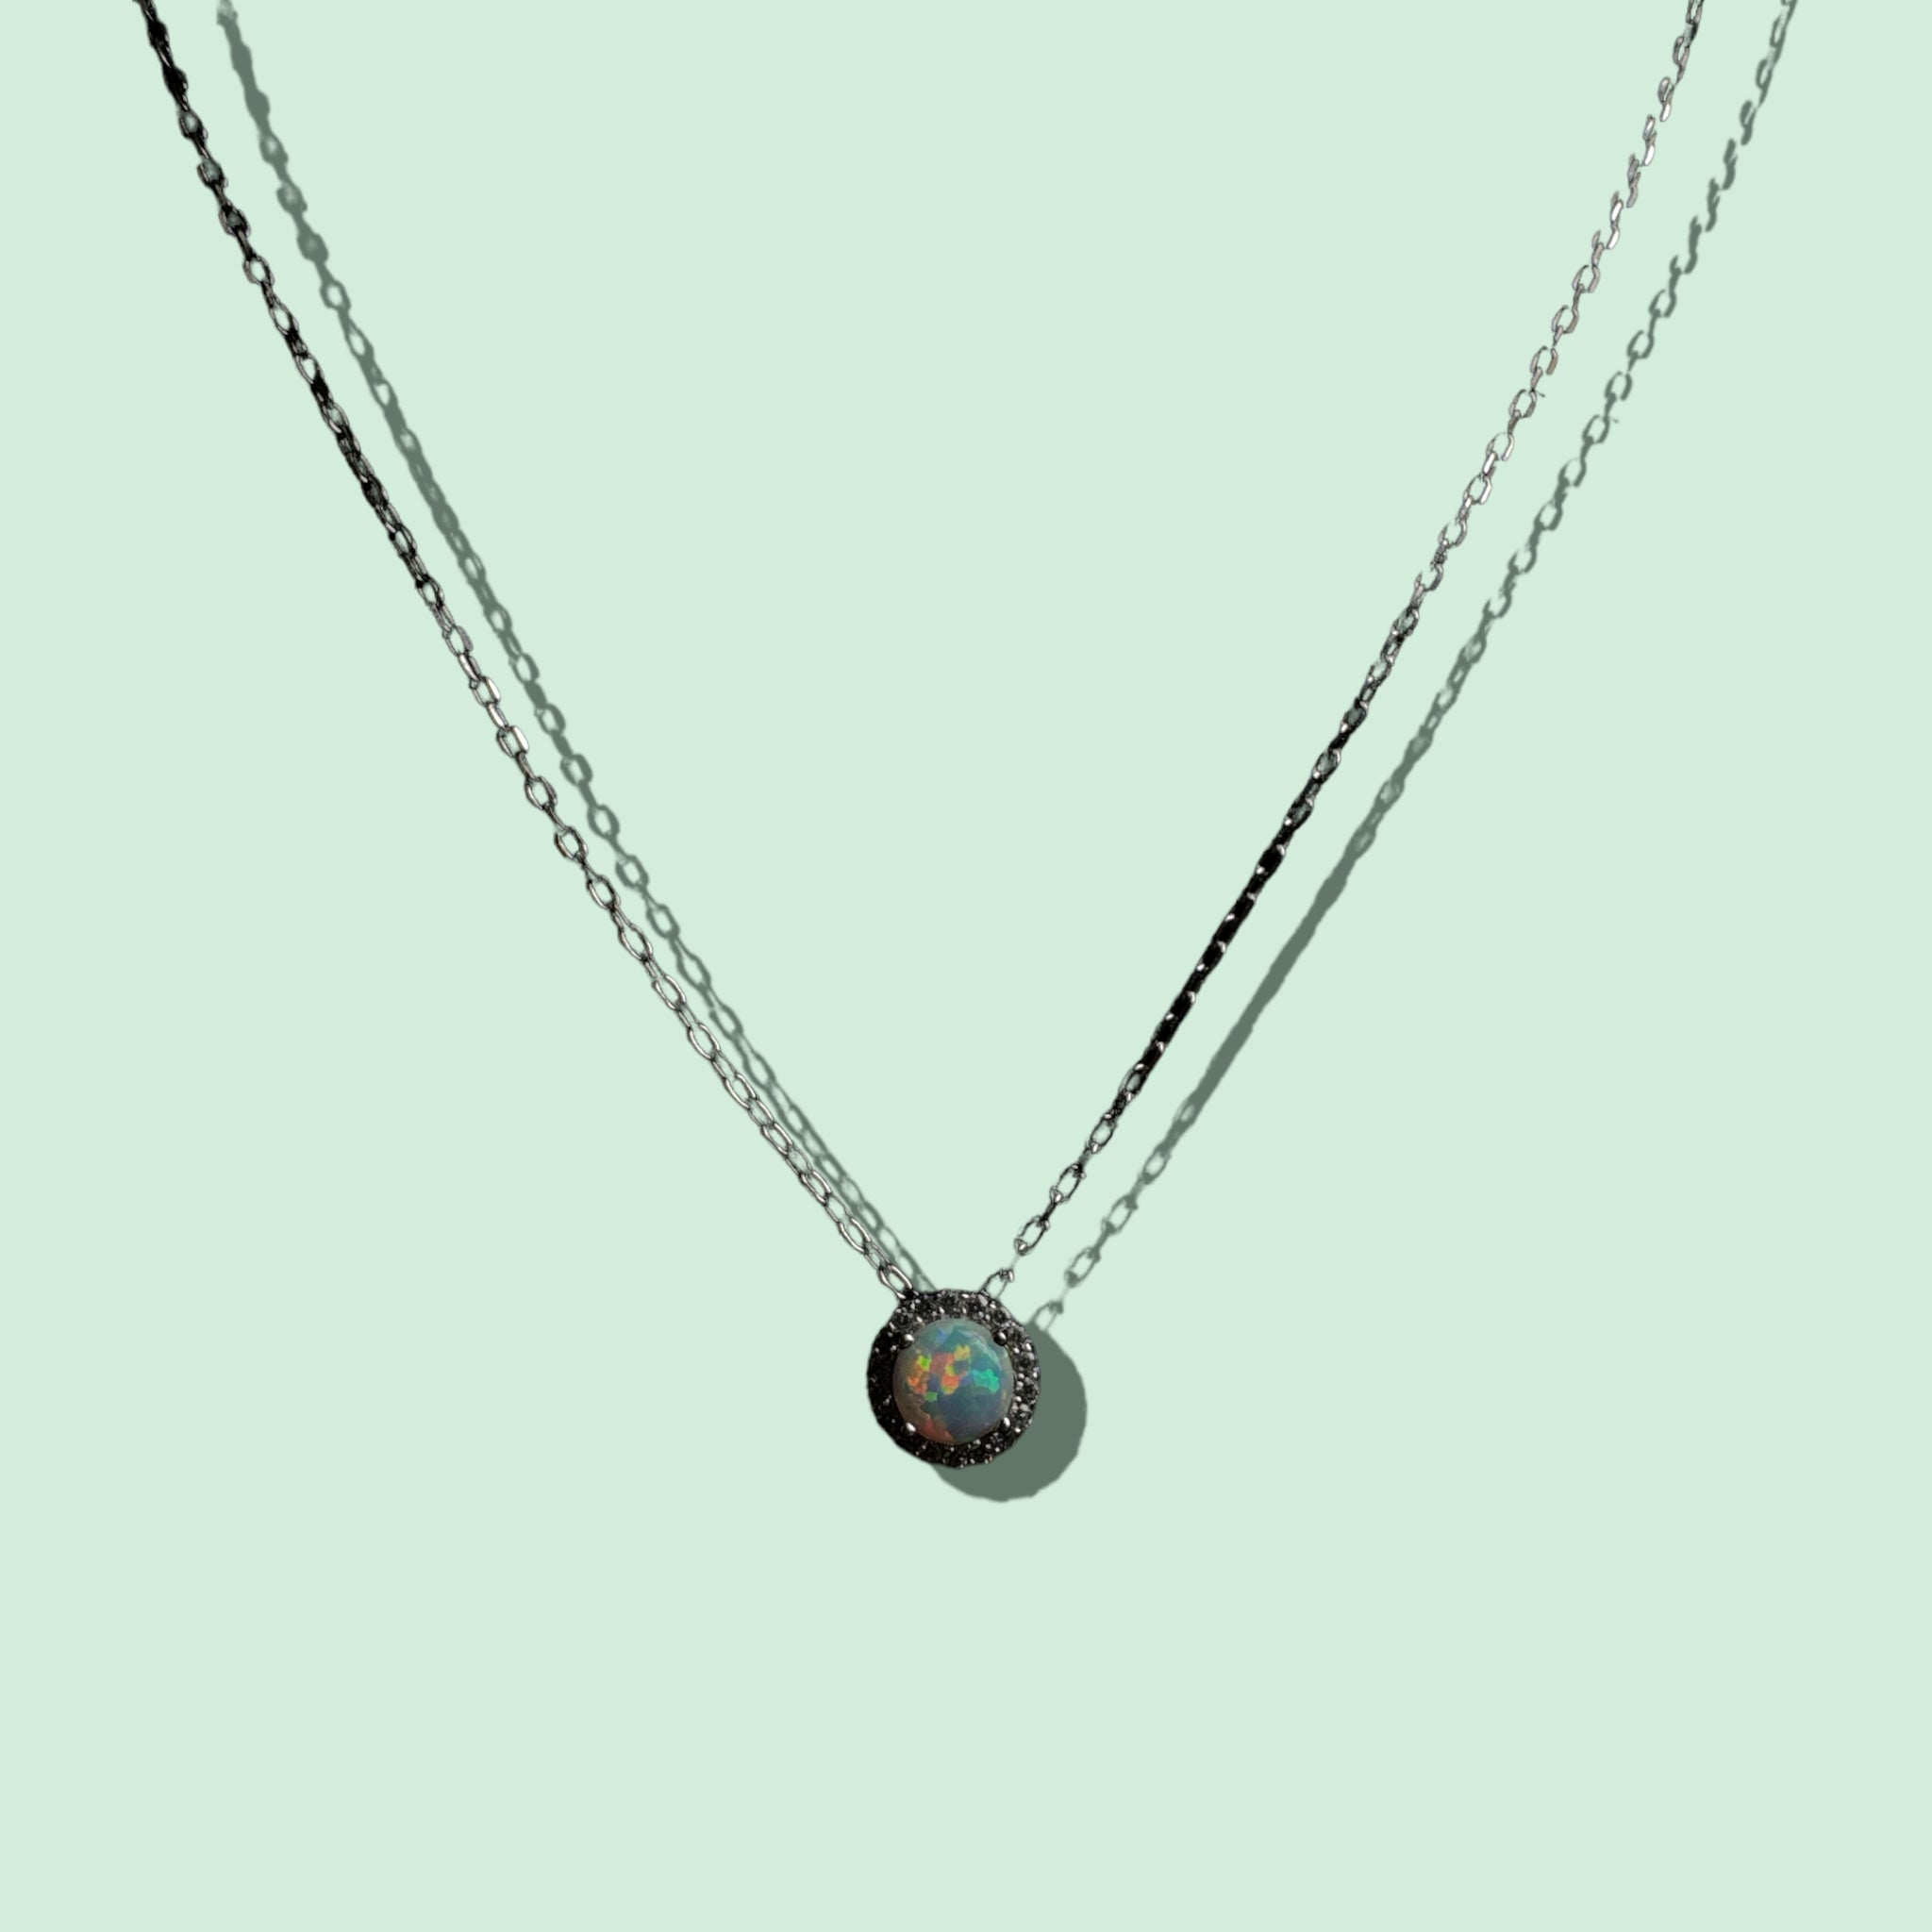 Synthetic opal encrusted with cubic zirconia sterling silver necklace